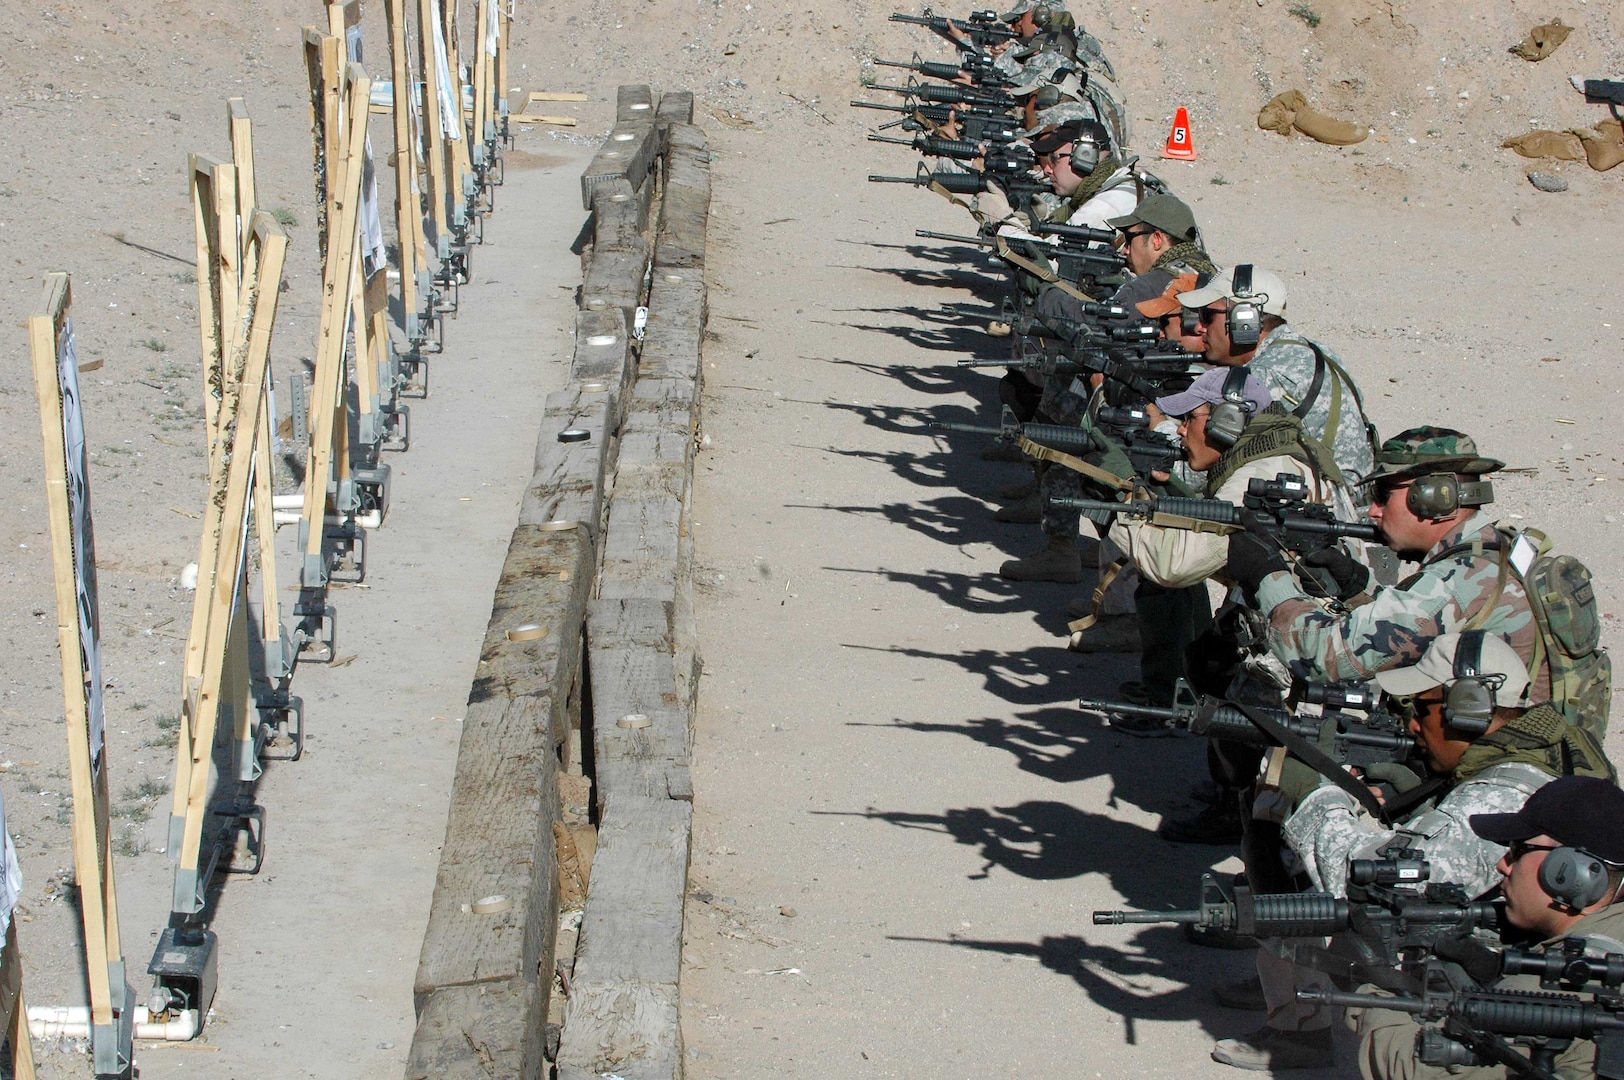 National Guard members and representatives of other federal, state and local agencies with homeland security missions conduct a close-range firing drill during the Gunfighter Course near Albuquerque, N.M., on May 31, 2007.